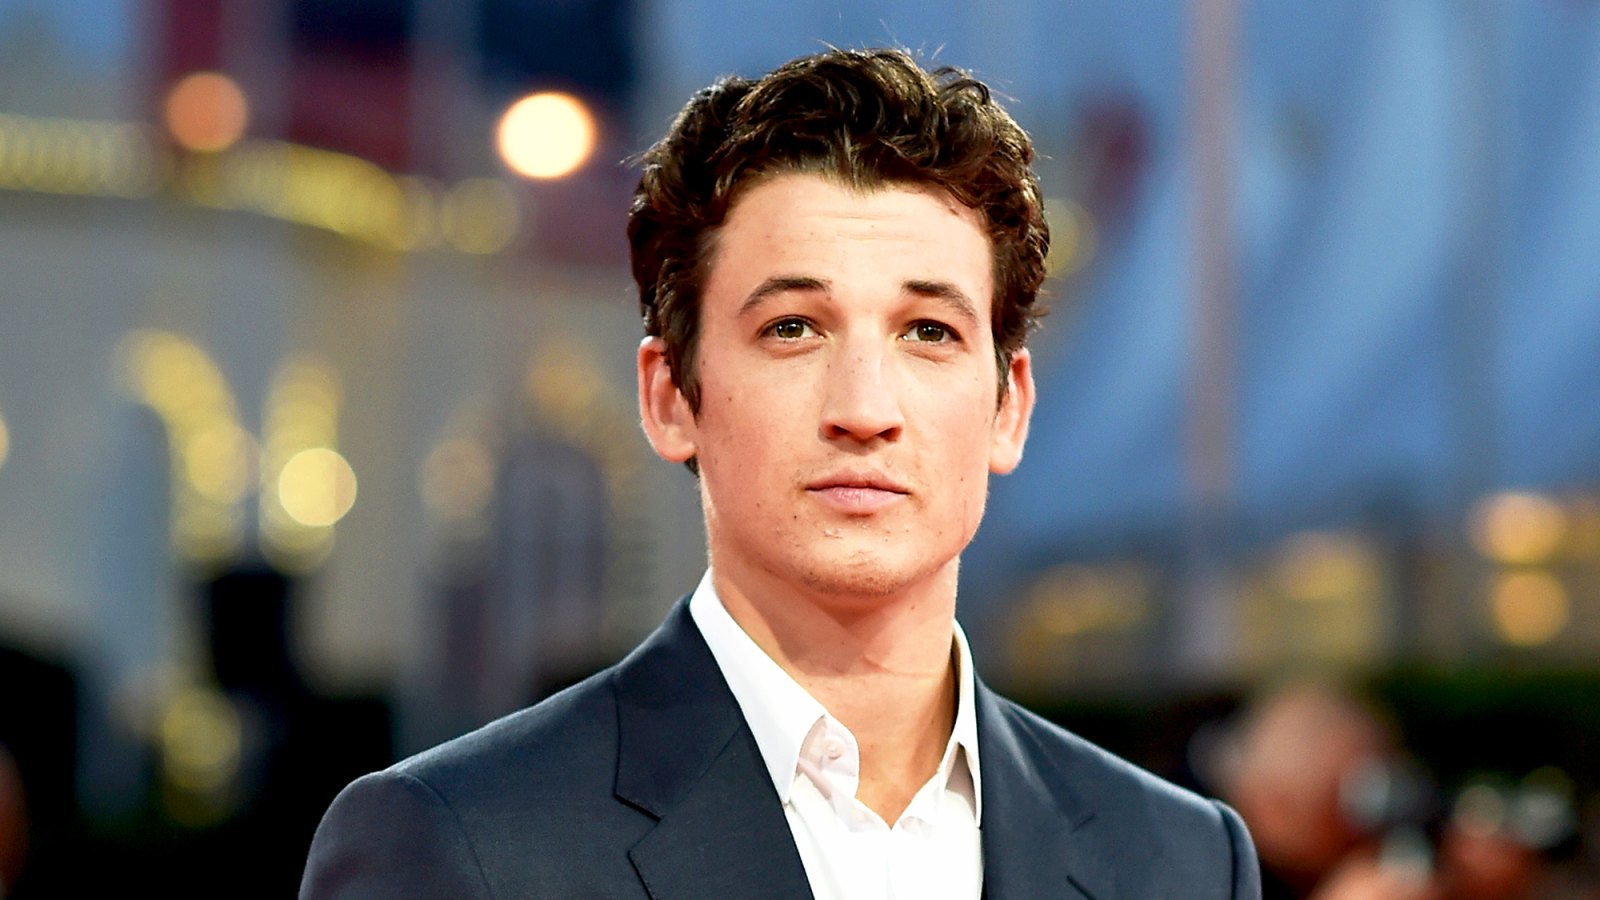 Miles Teller attends "The November man" 2014 premiere in Deauville, France.